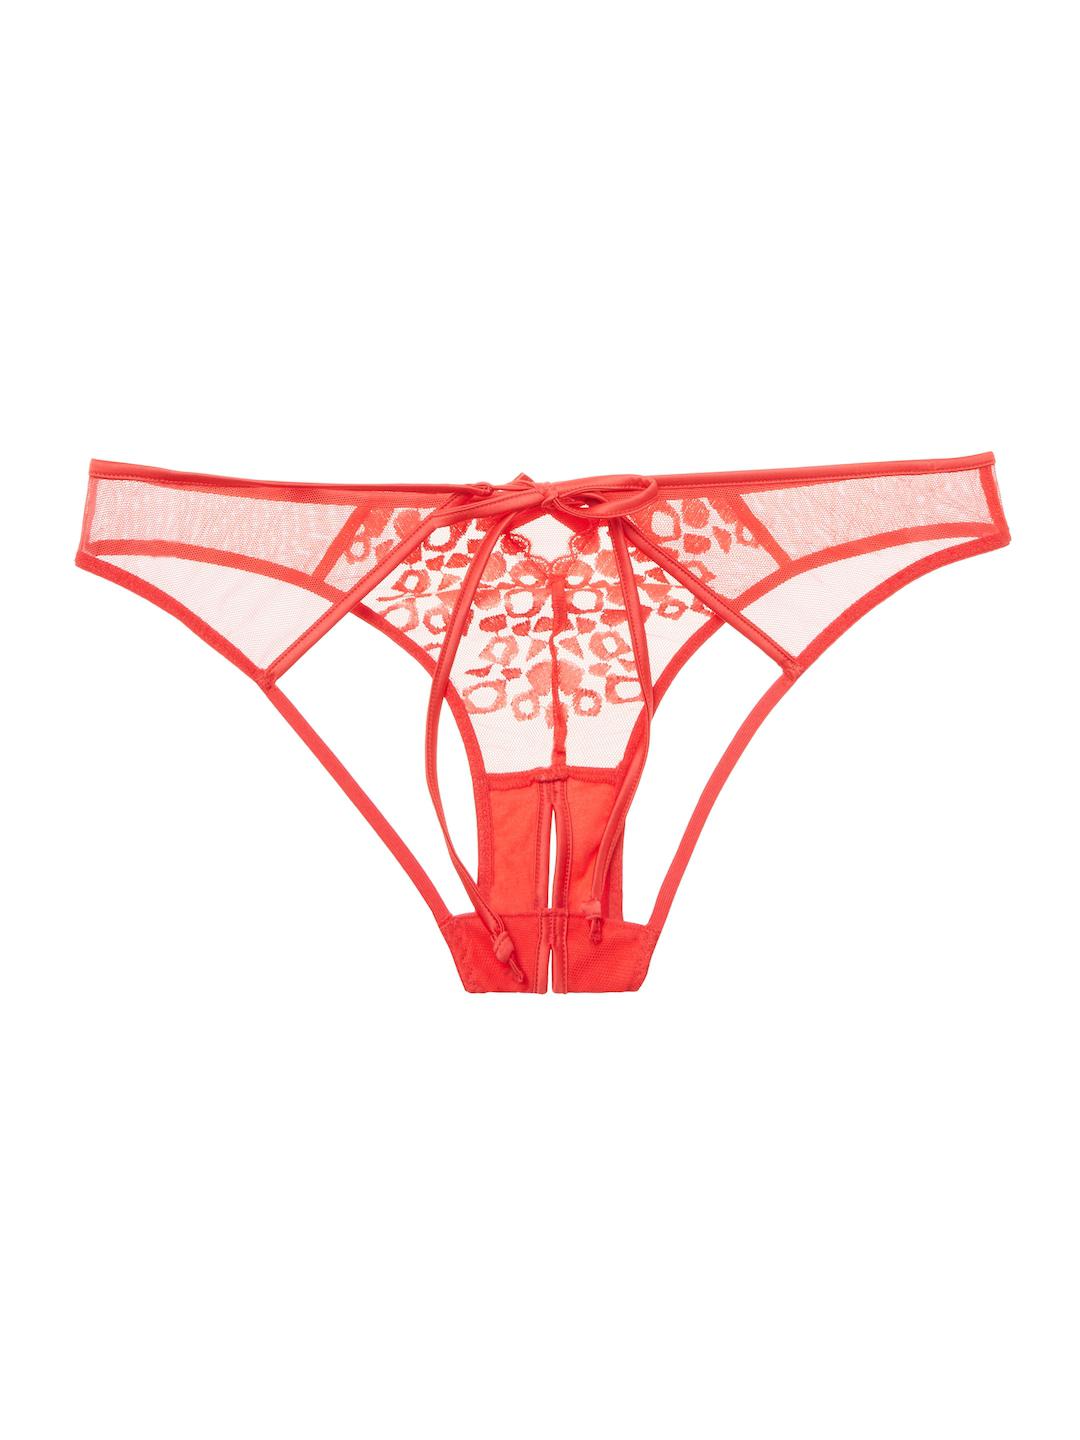 L'Agent by Agent Provocateur Odessa Ouvert Brief in Red - Lyst